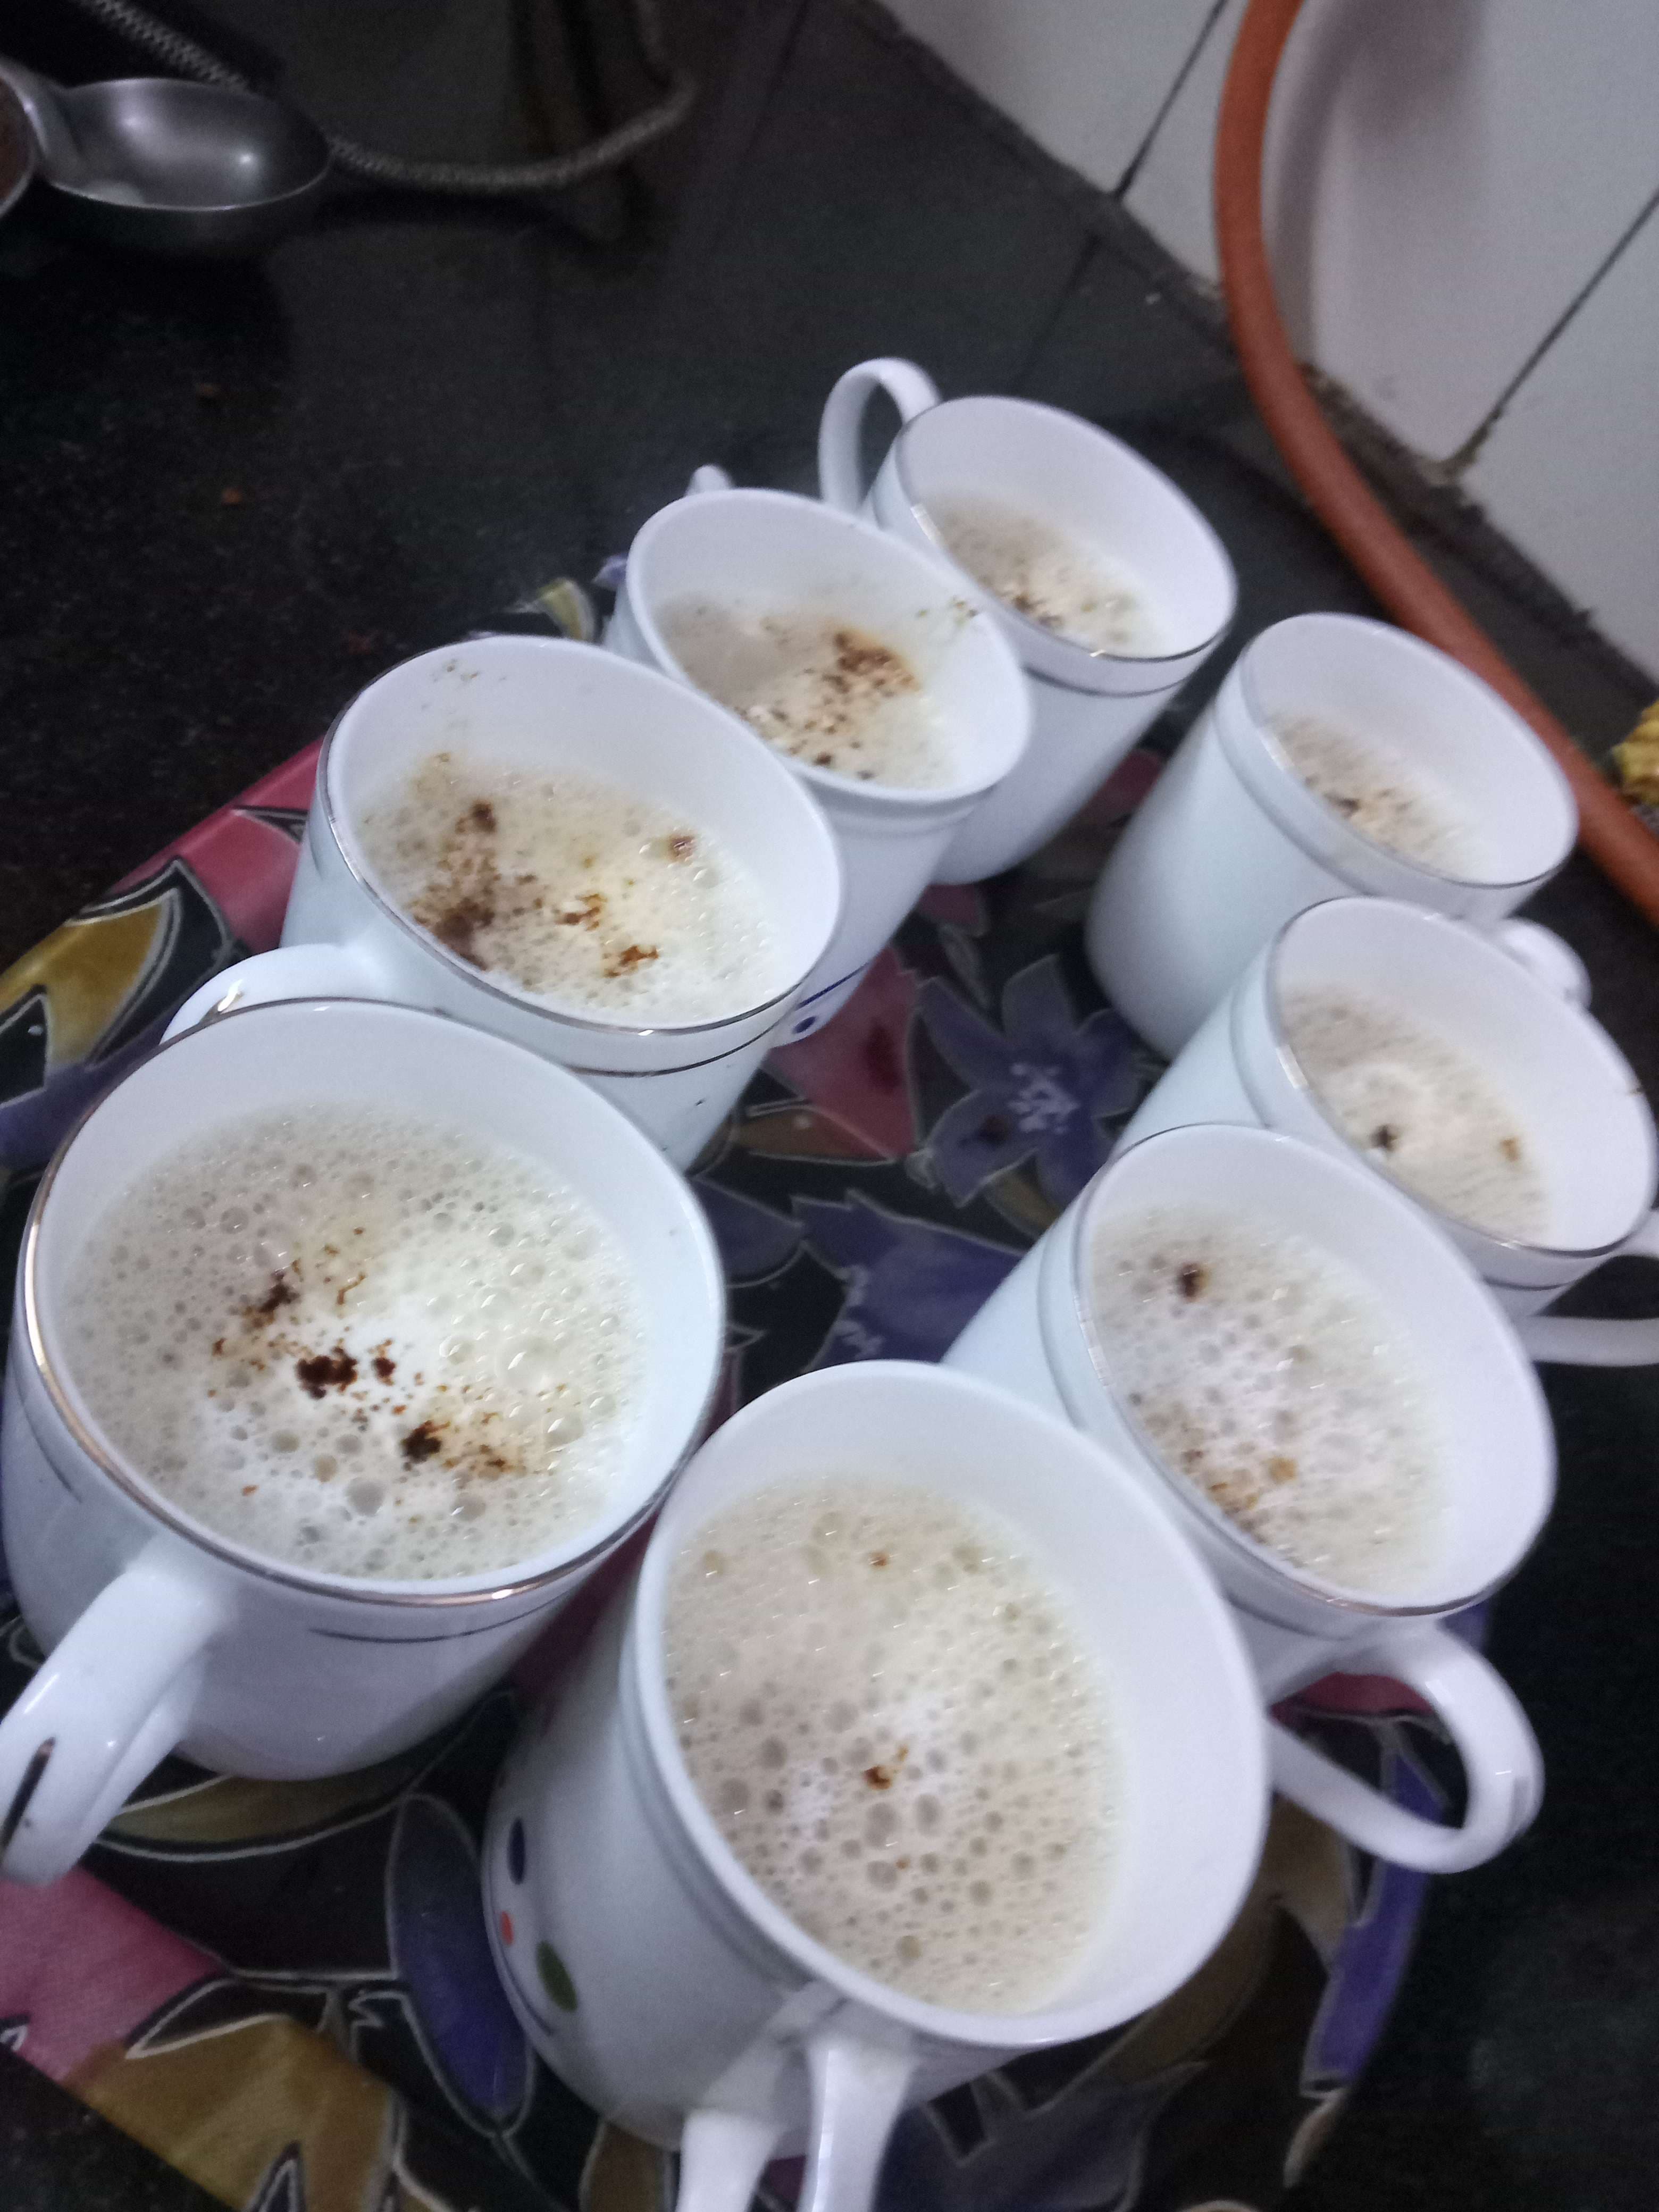 Delicious Hot Coffee prepared by COOX